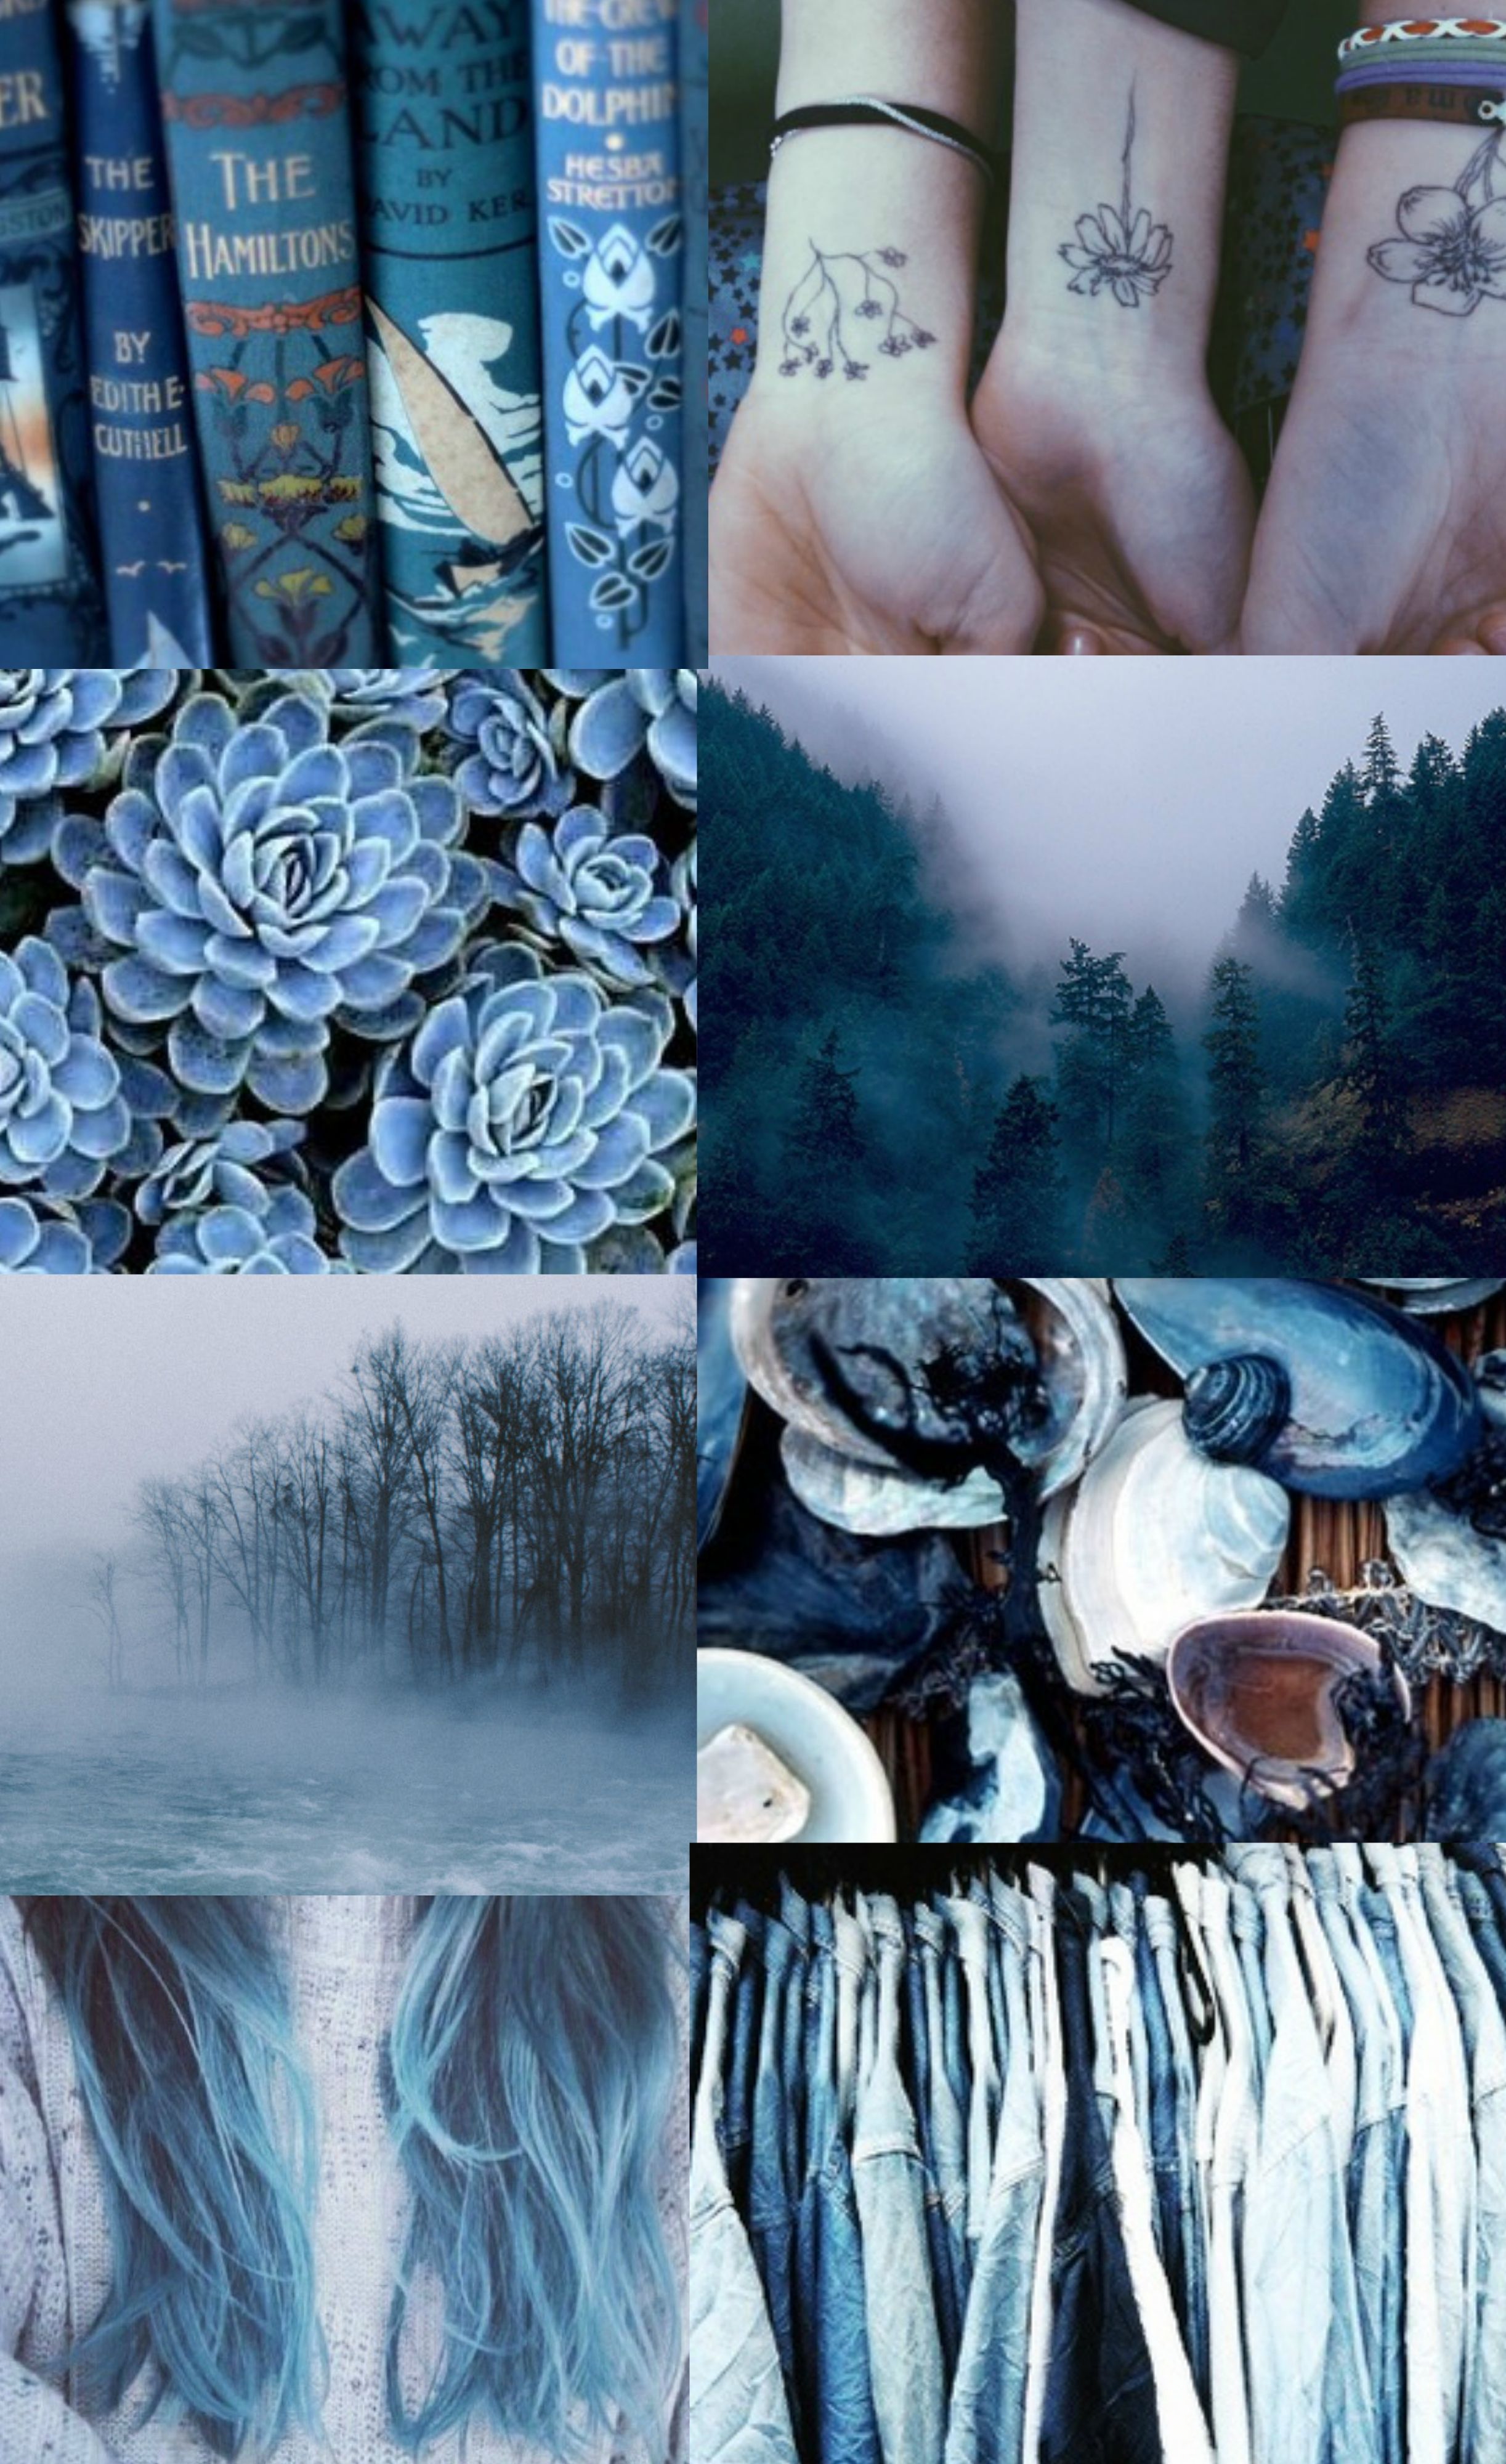 ravenclaw // aesthetic. Harry potter aesthetic, Ravenclaw, Blue